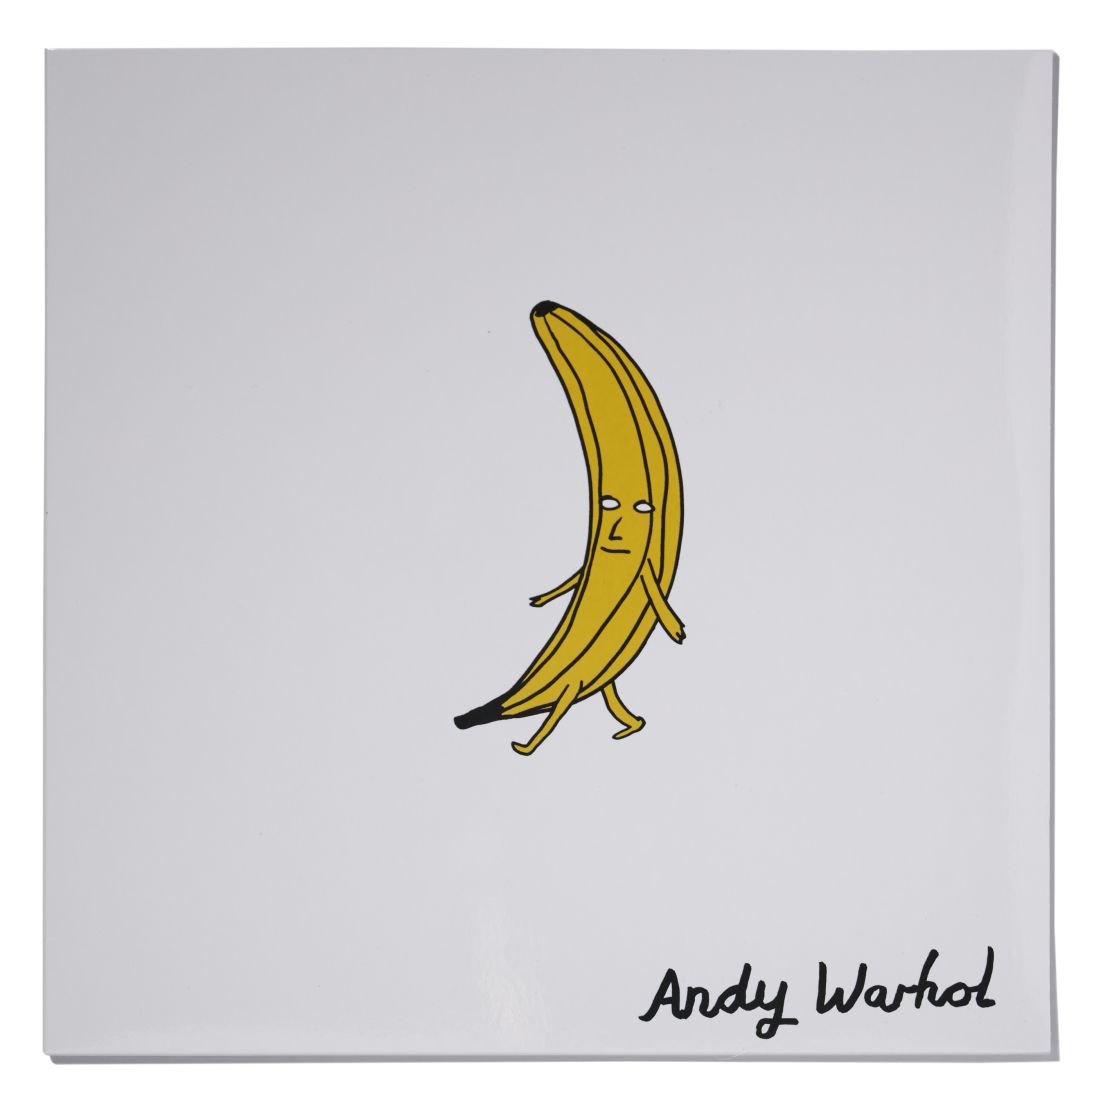 For the 45th anniversary of "The Velvet Underground & Nico" in 2012, British artist David Shrigley illustrated a special edition  reissue cover for Castle Face Records.